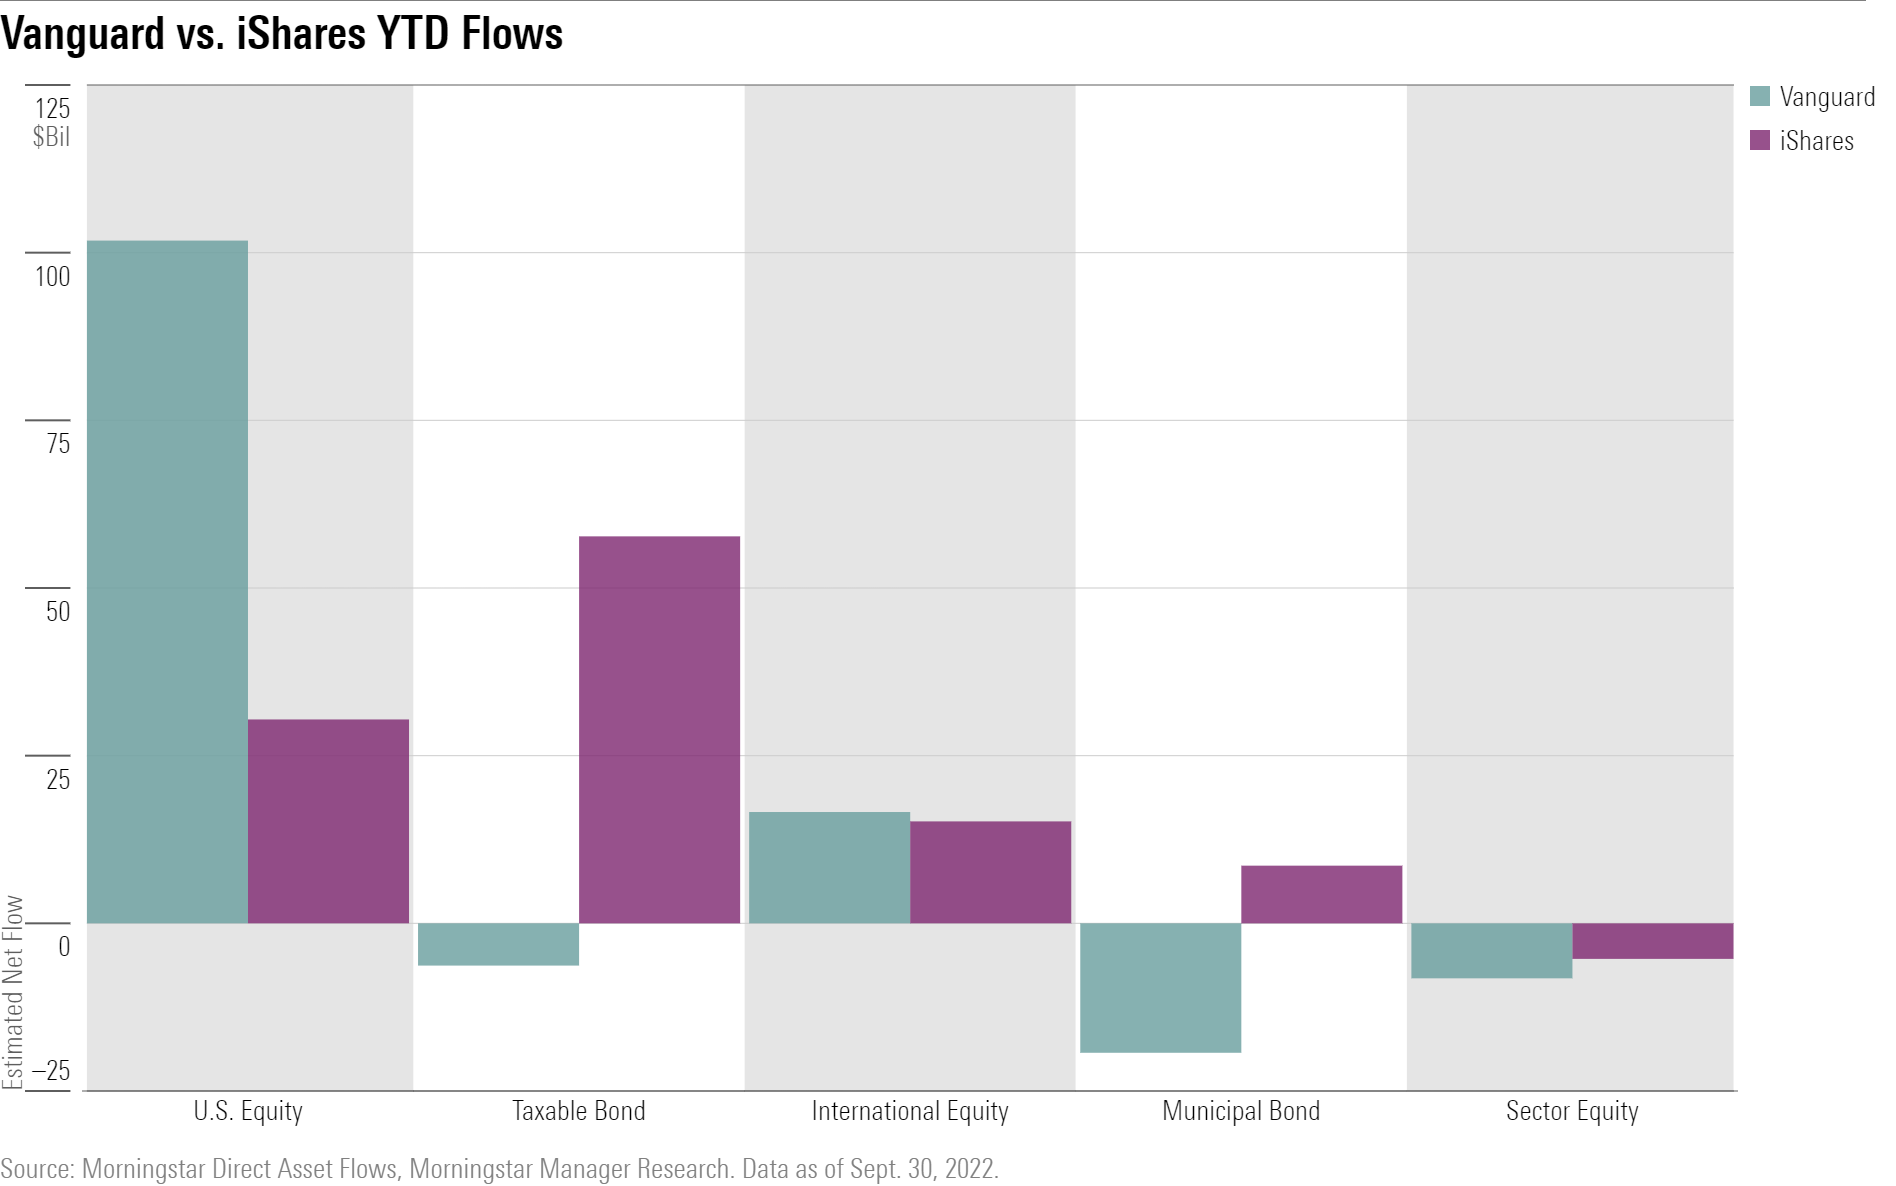 IShares has won in the fixed-income arena by a wide margin this year, bolstered by inflows into its Treasury funds. That gave iShares the year-to-date flows lead over Vanguard through three quarters: $105.1 billion to $75.9 billion.